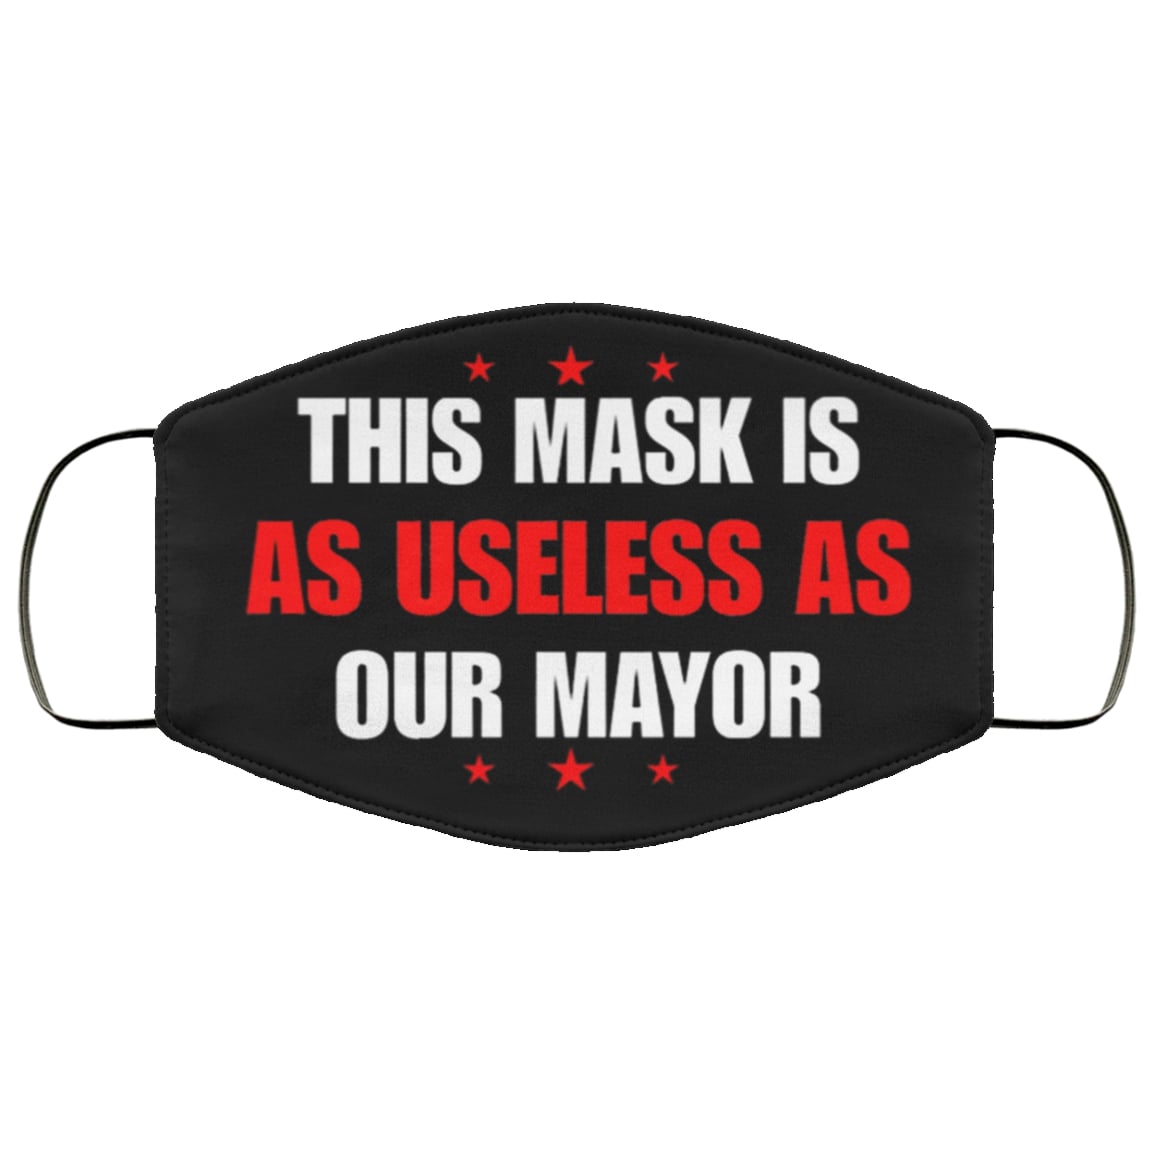 This mask is as useless as our mayor anti pollution face mask – maria